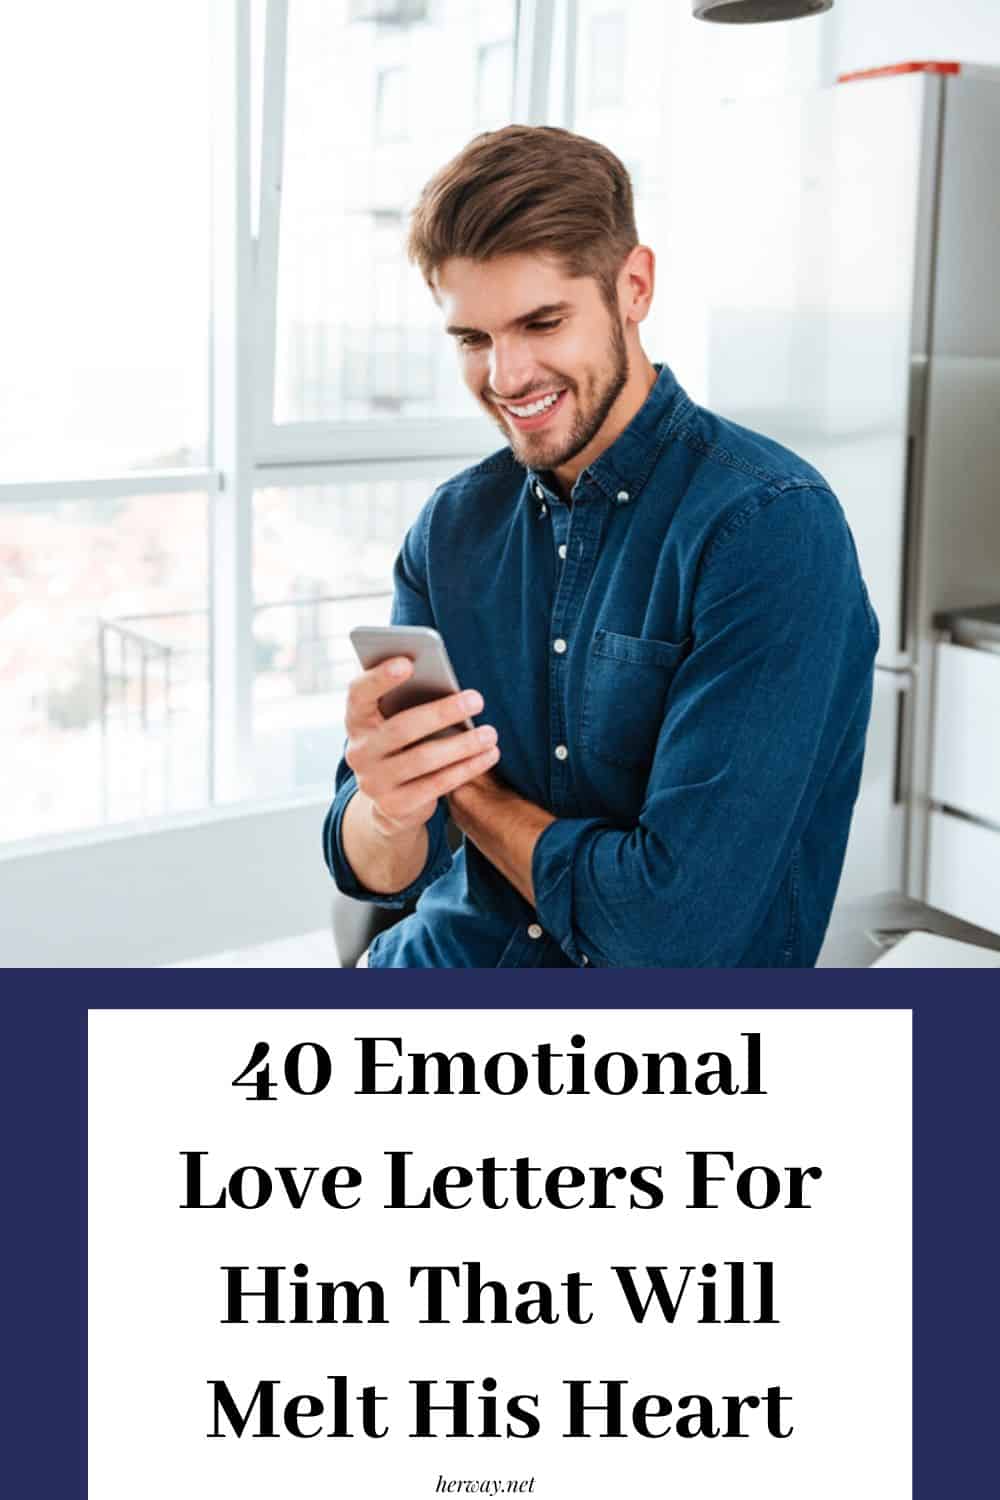 40 Emotional Love Letters For Him That Will Melt His Heart.